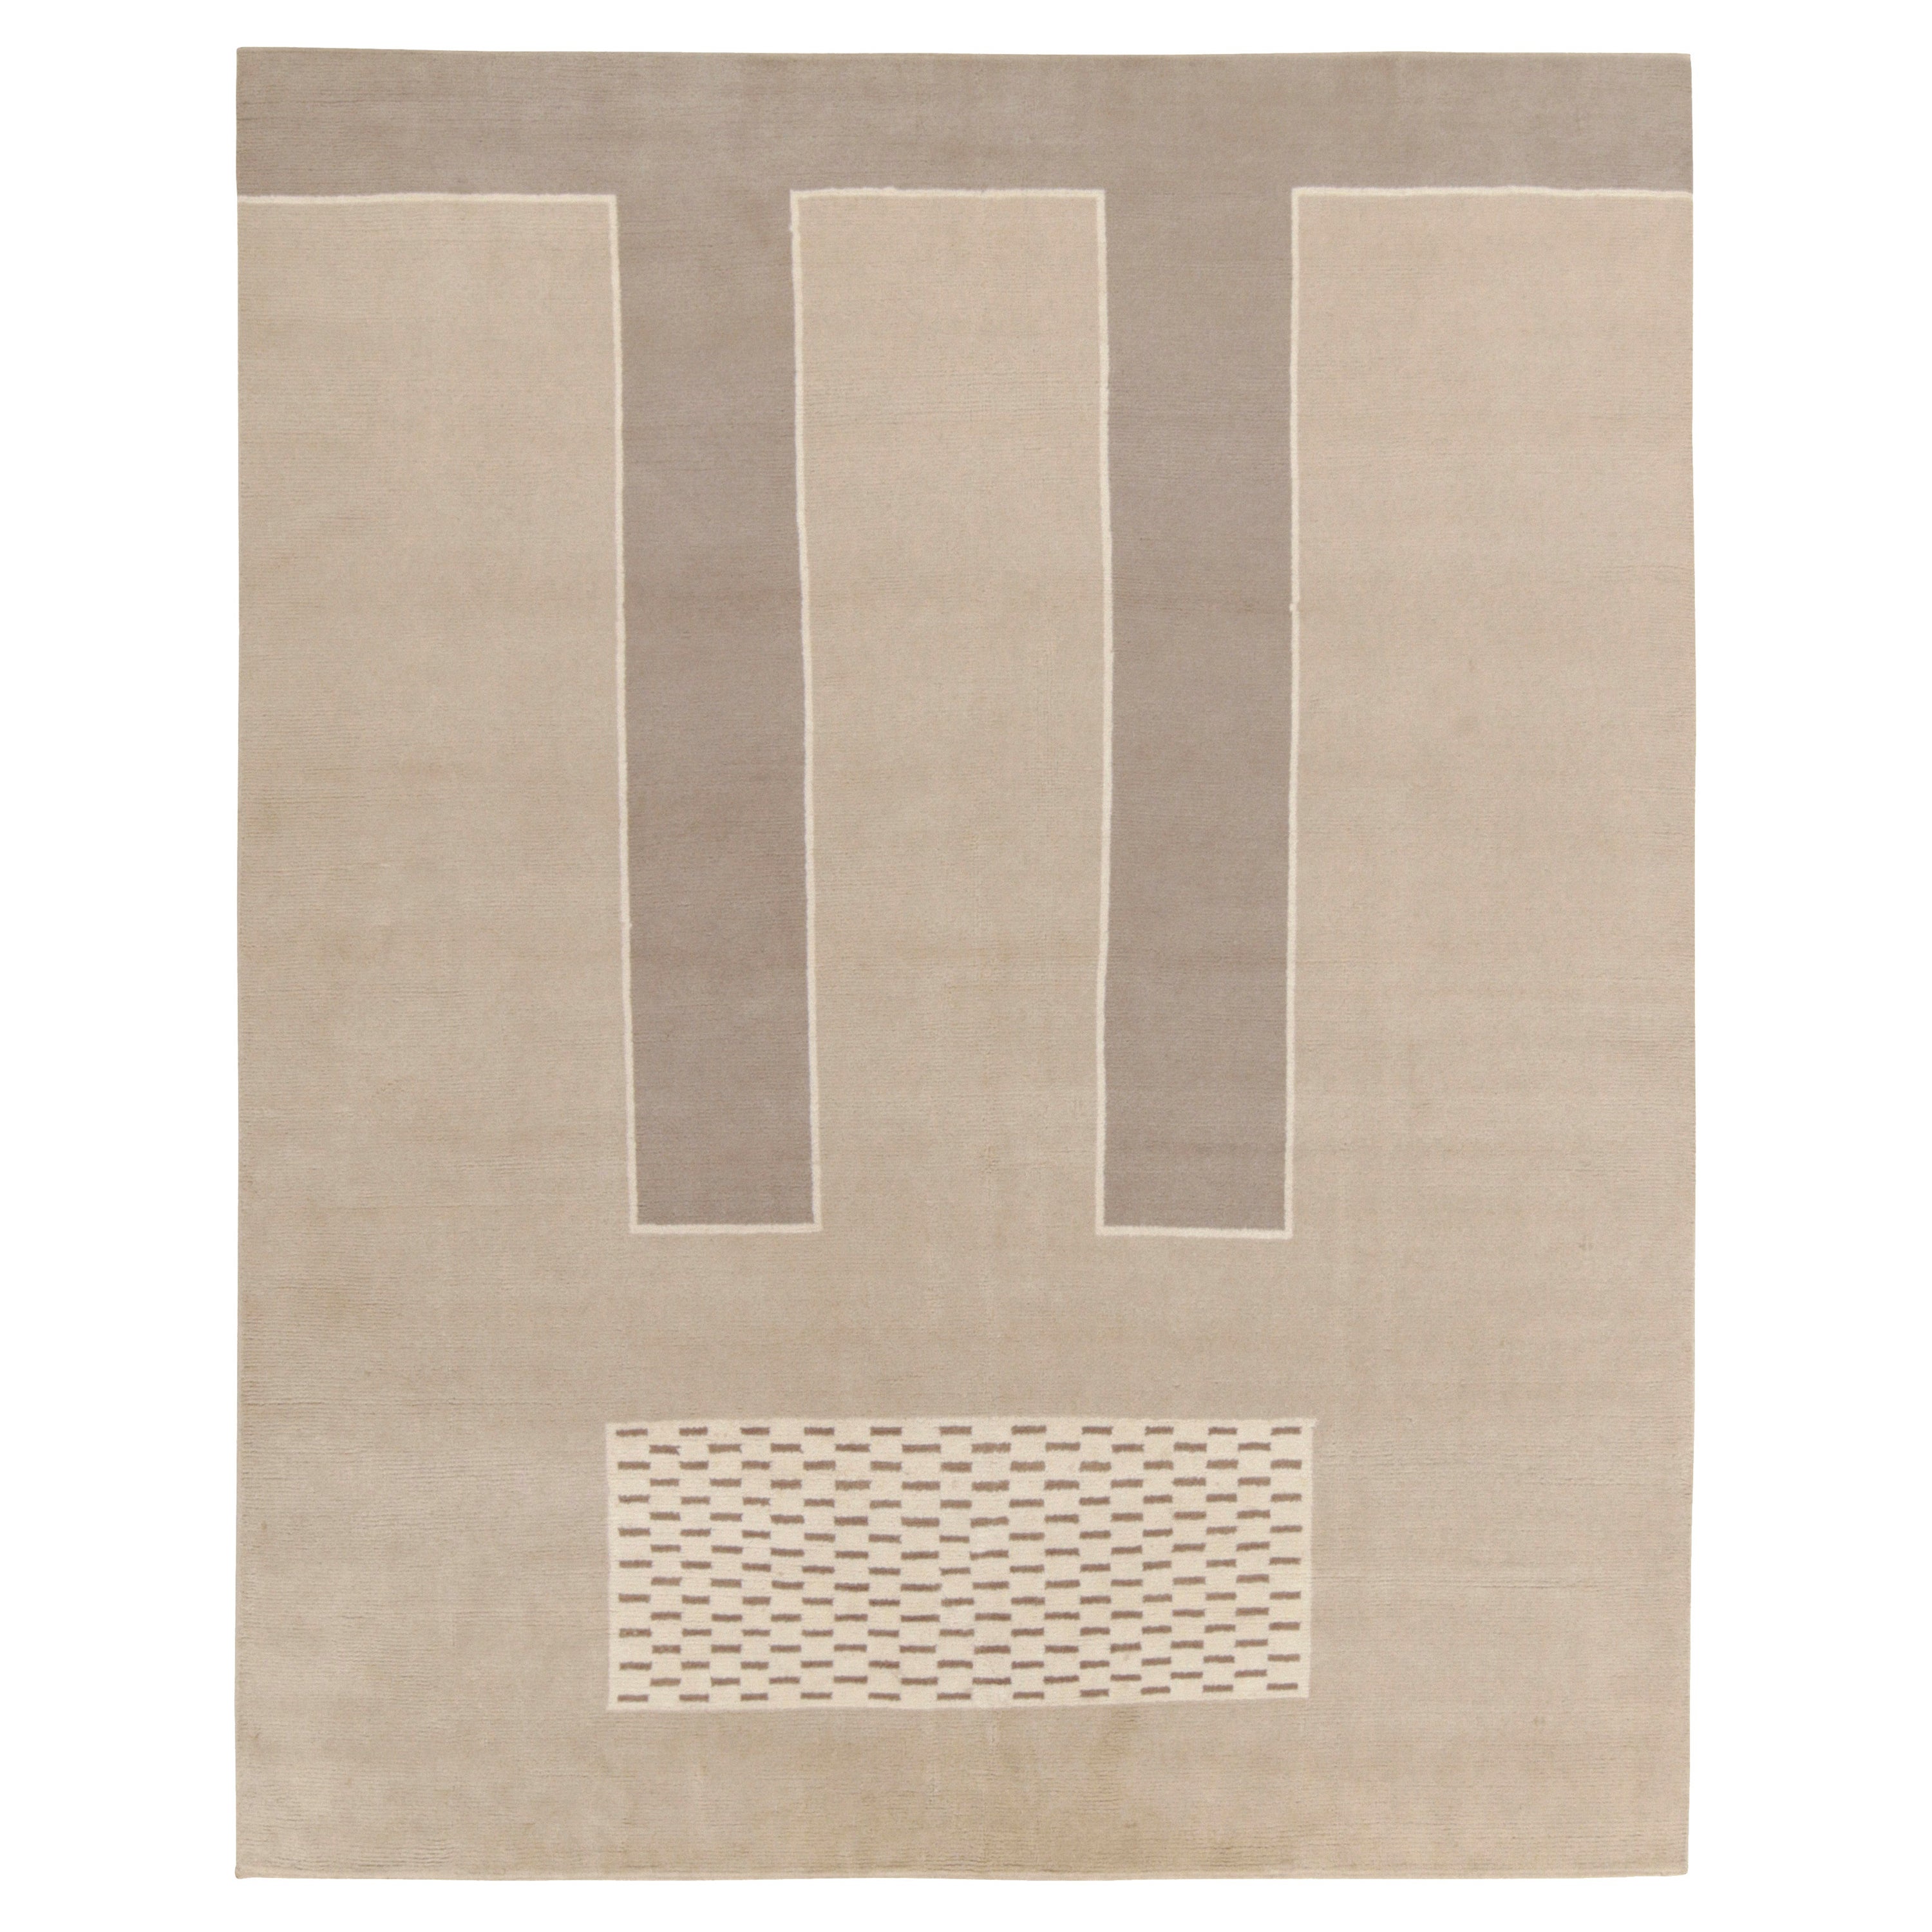 Rug & Kilim’s Art Deco style rug in Beige and Gray Geometric Patterns